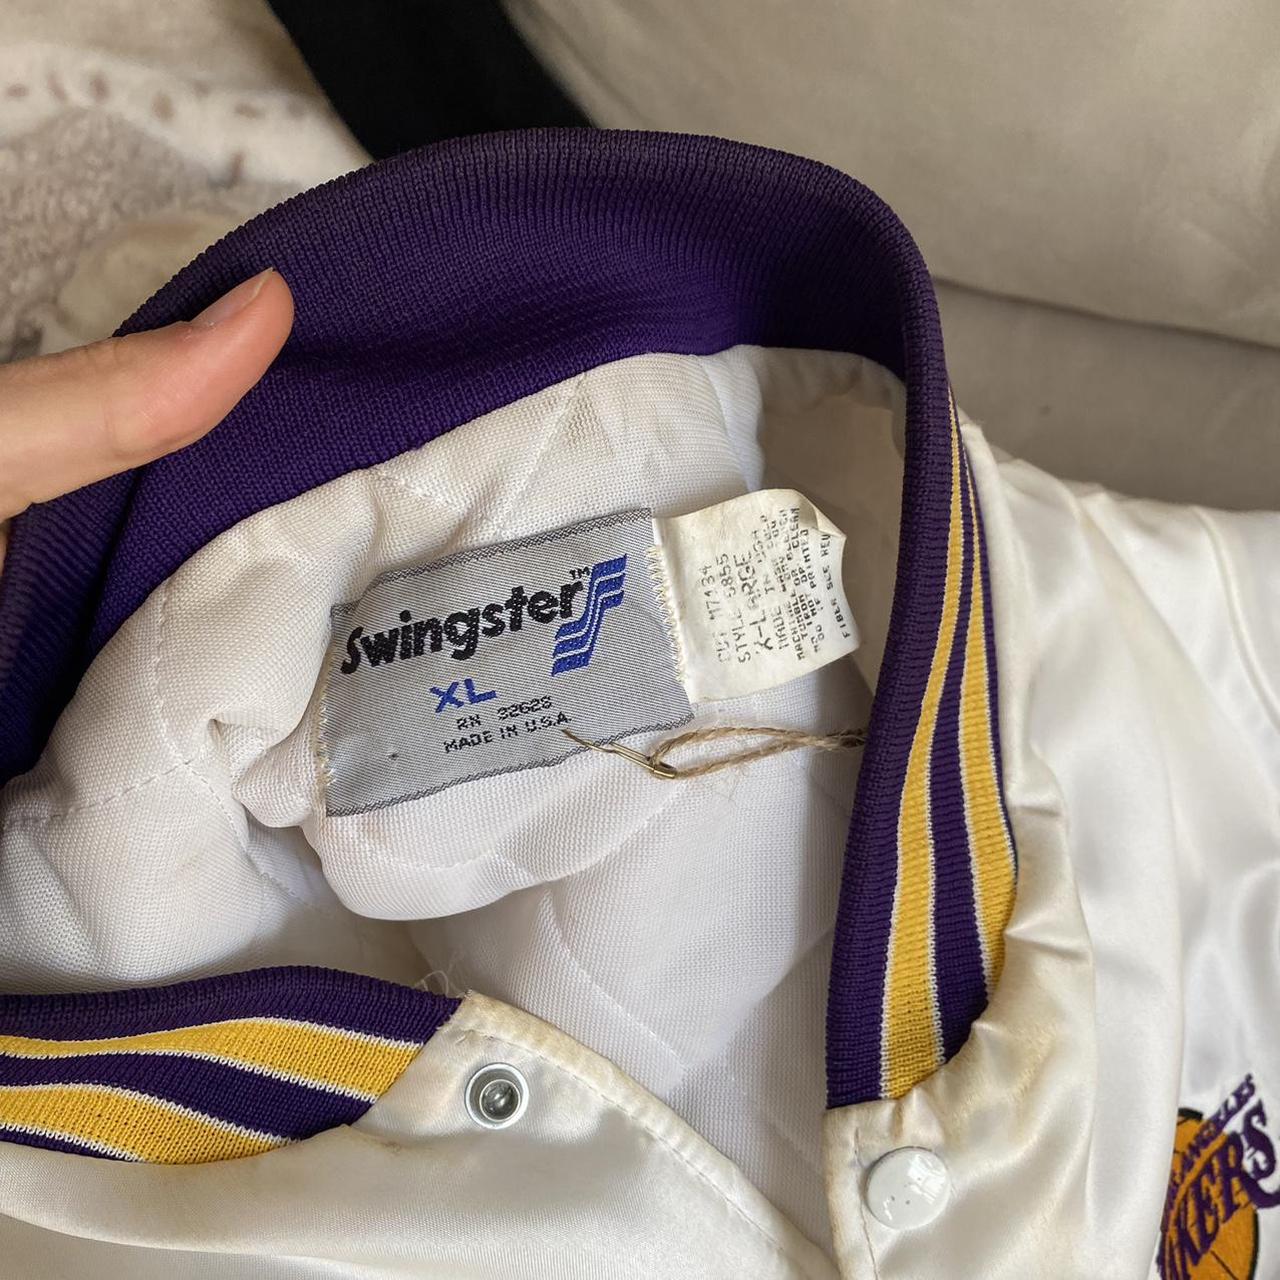 Vintage Lakers Warmup Jacketwith un authenticated - Depop